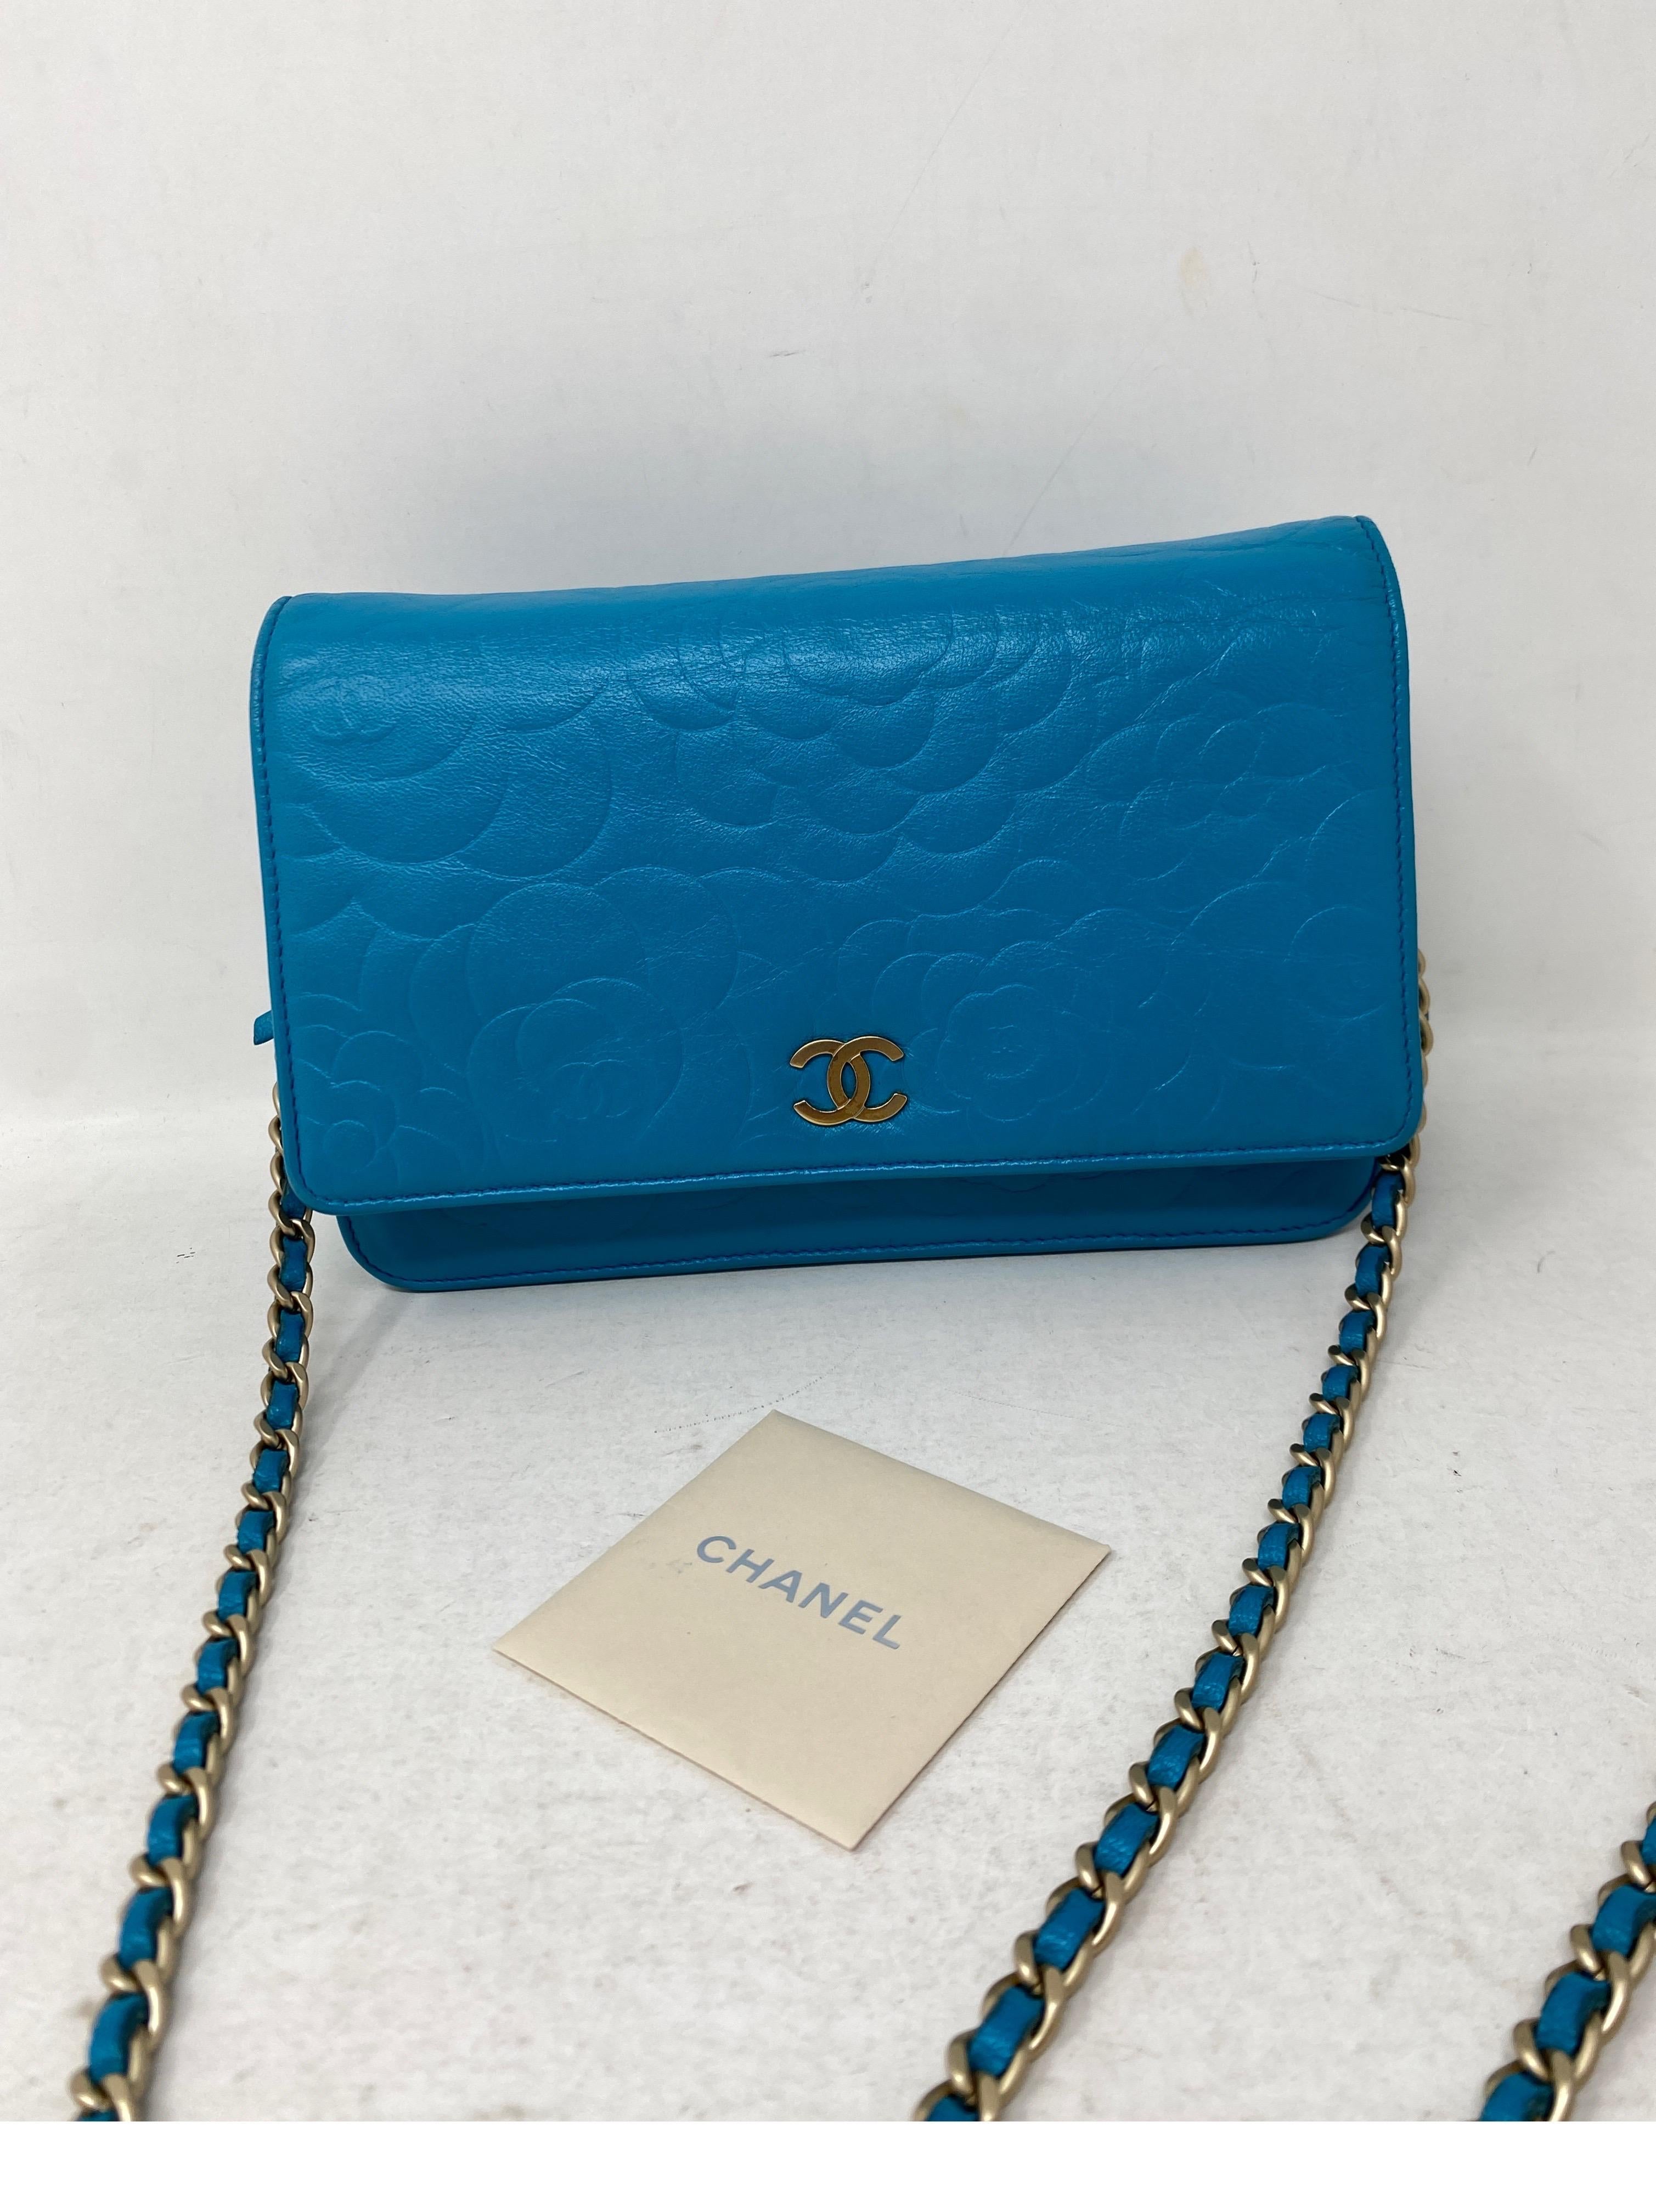 Chanel Teal Wallet On A Chain Bag  5